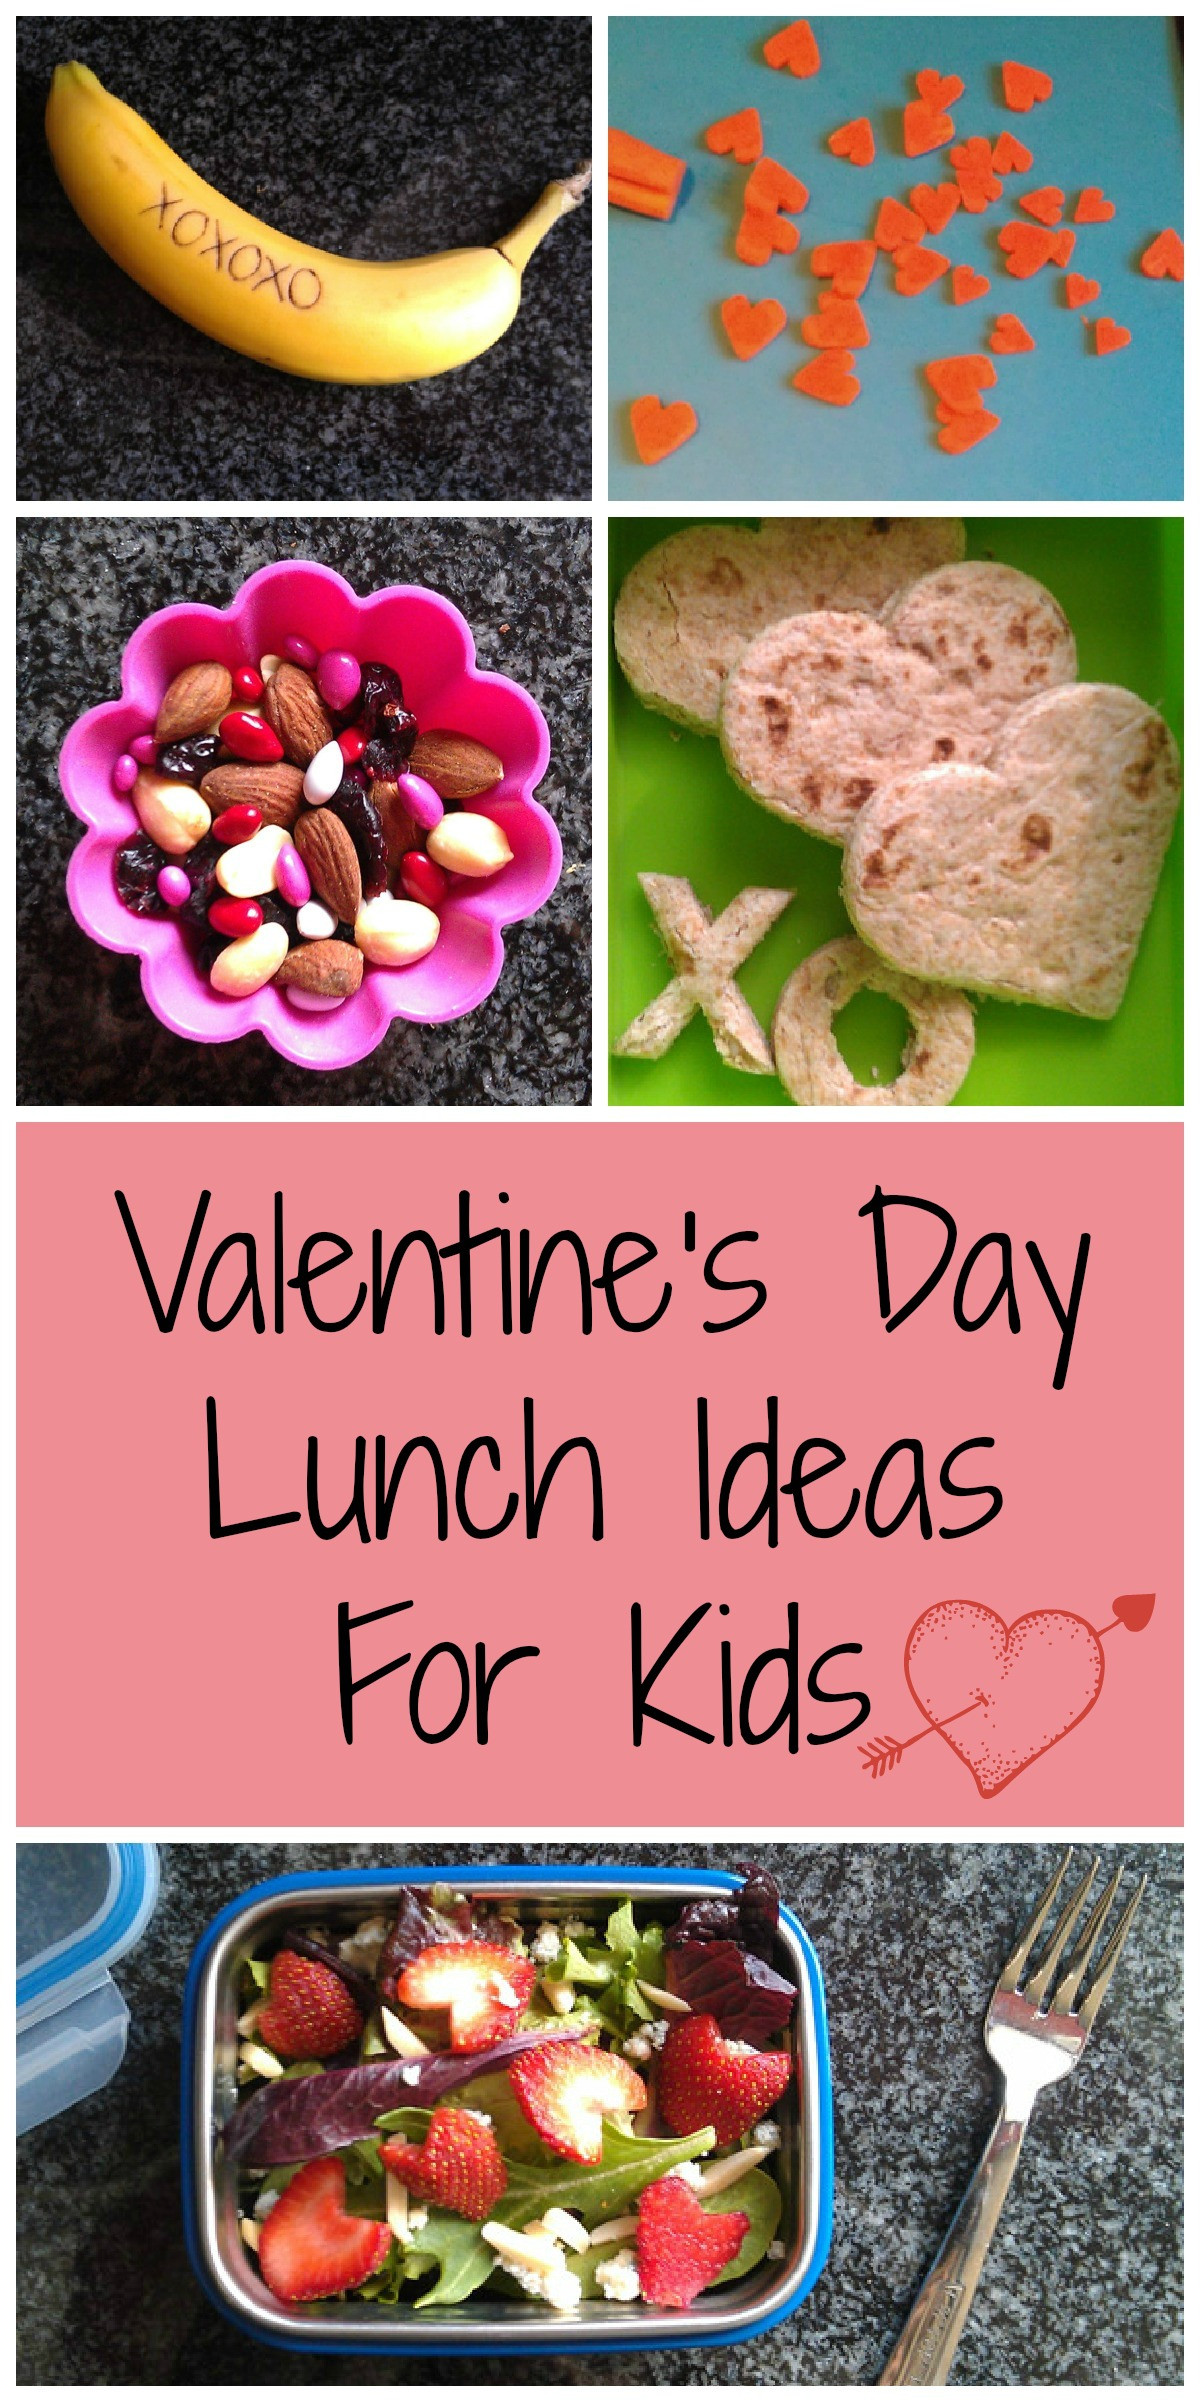 Fun Ideas For Valentines Day
 6 Healthy Valentine s Day Lunch Ideas